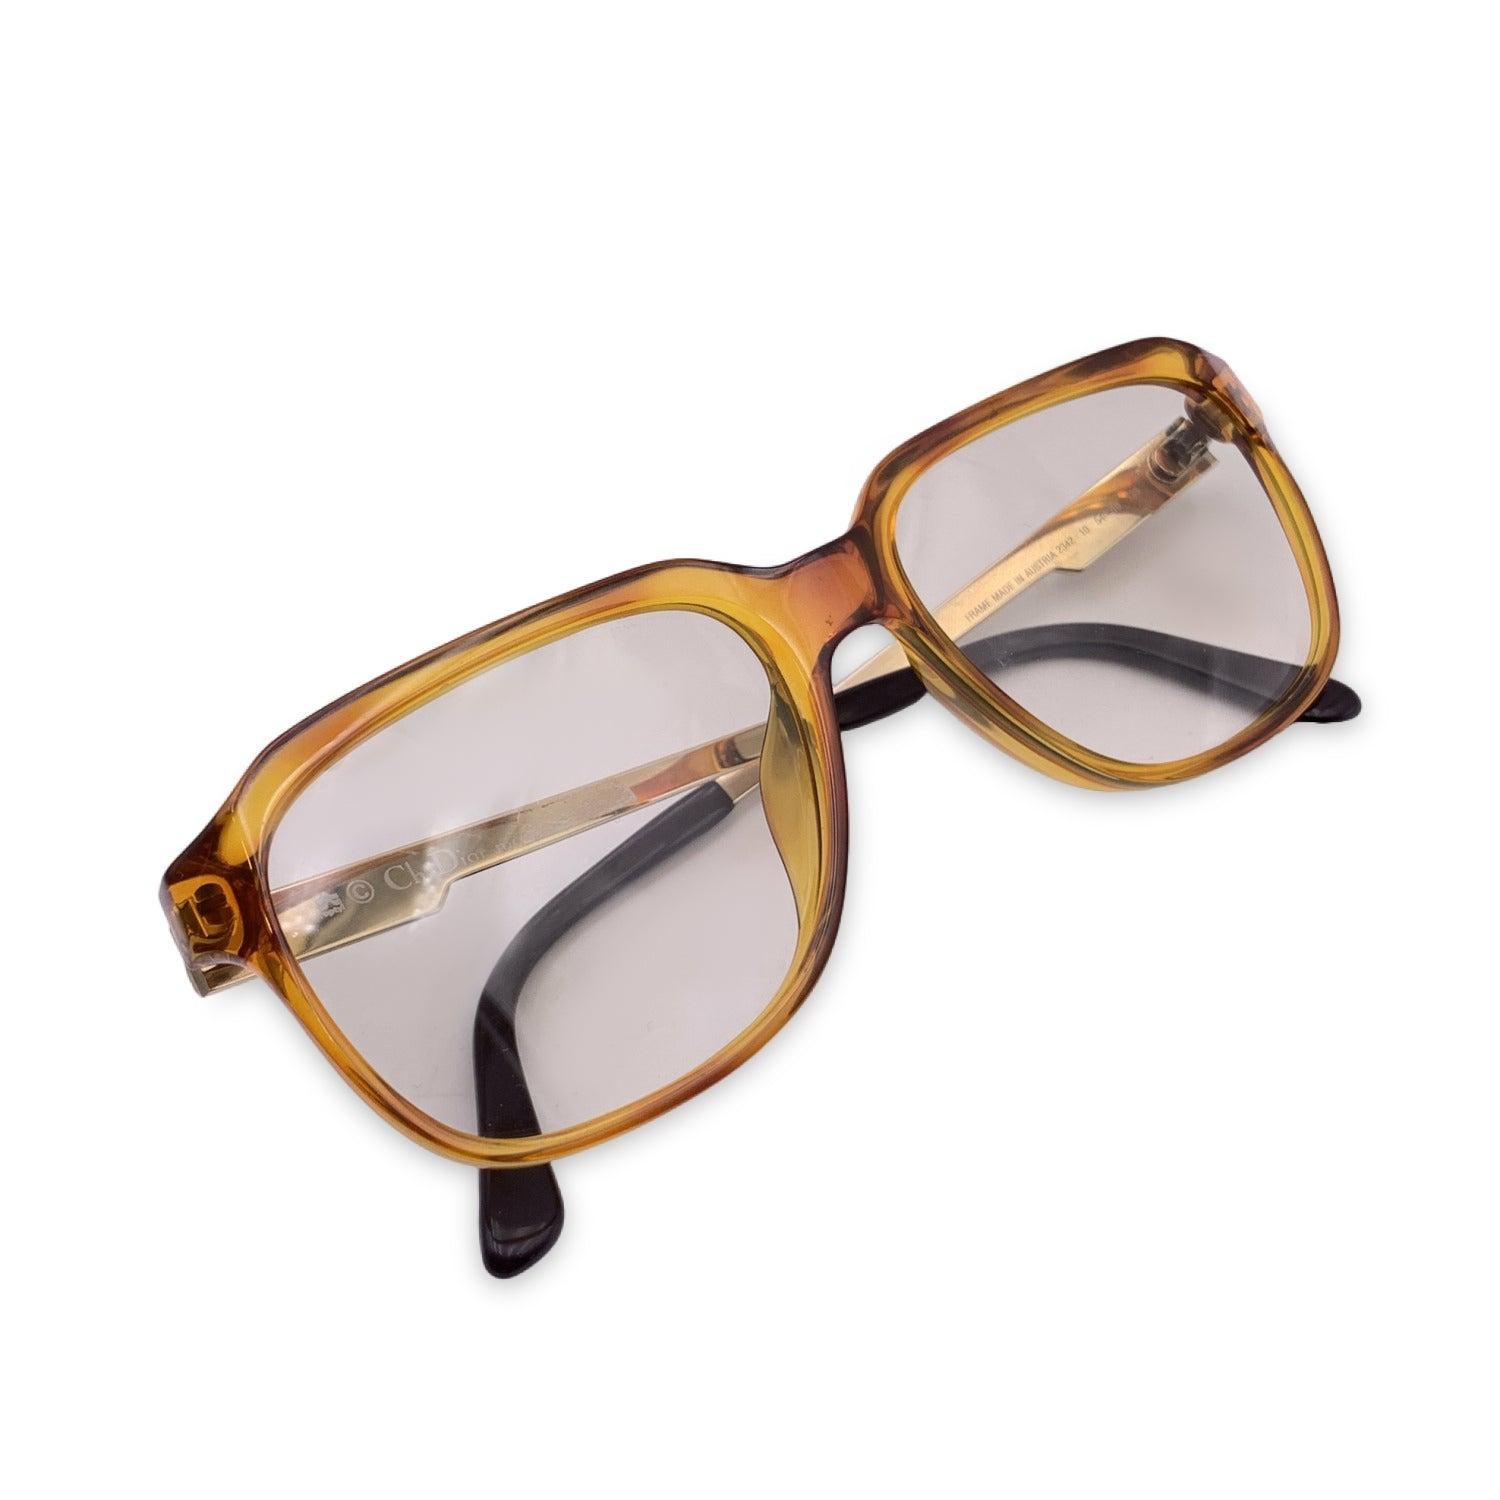 Vintage Christian Dior Monsieur Unisex Sunglasses, Mod. 2342 10 Optyl. Size: 54/16 135mm. Honey color acetate frame, with gold metal finish on the sides. . 100% Total UVA/UVB protection. Very light yellow gradient lenses. CD logos on temples.